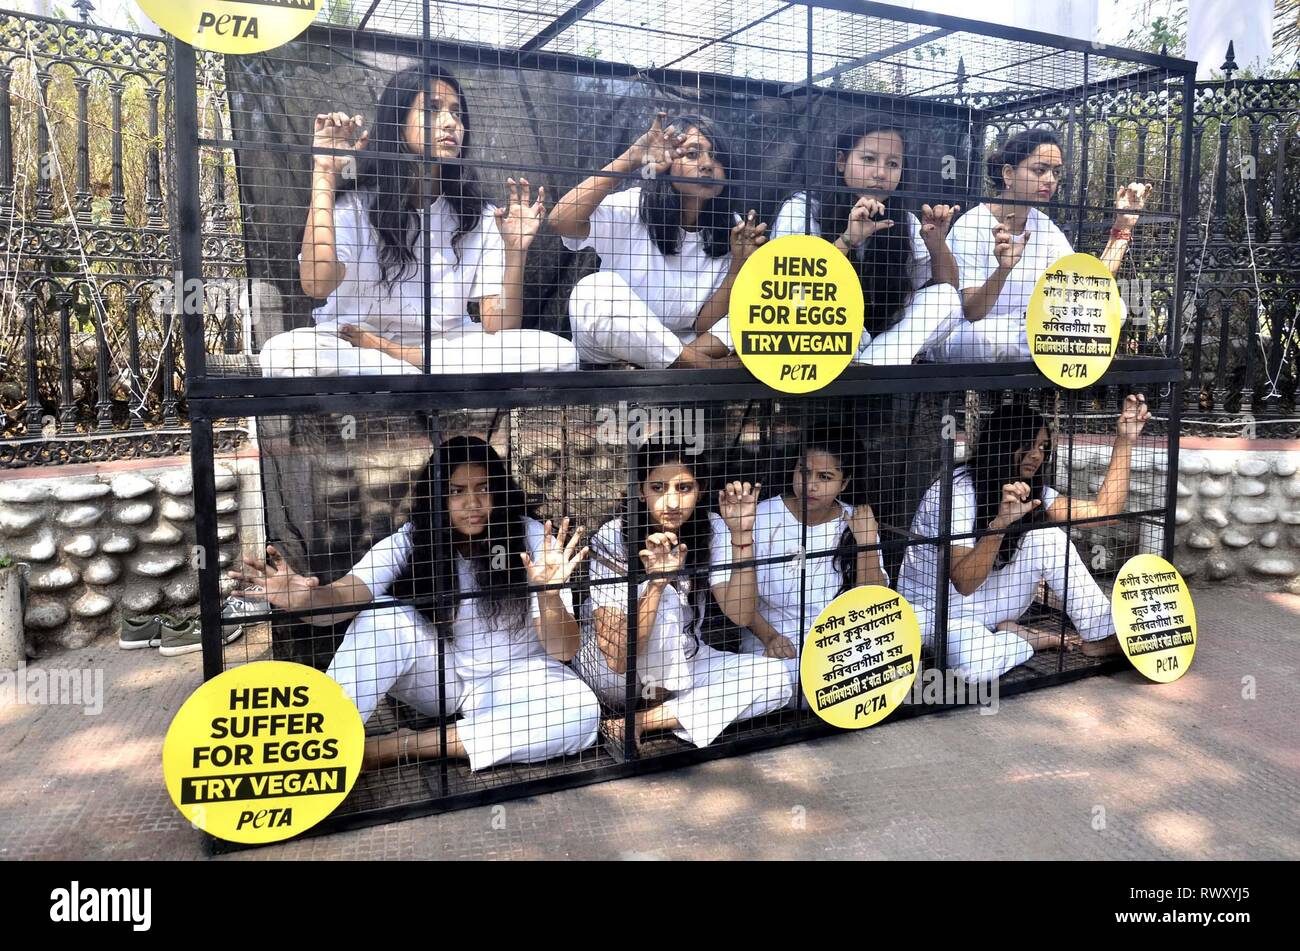 Guwahati, Assam, India. 07th Mar, 2019. Activists of PETA demonstrating by caging themselves in solidarity with hens in Guwahati ahead of the International Women Day on Thursday, 07 March 2019. During the International Women Day on March 8, Women in Guwahati will embrace this year's theme “Balance For Better” and cram themselves into Cage. Credit: Hafiz Ahmed/Alamy Live News Stock Photo